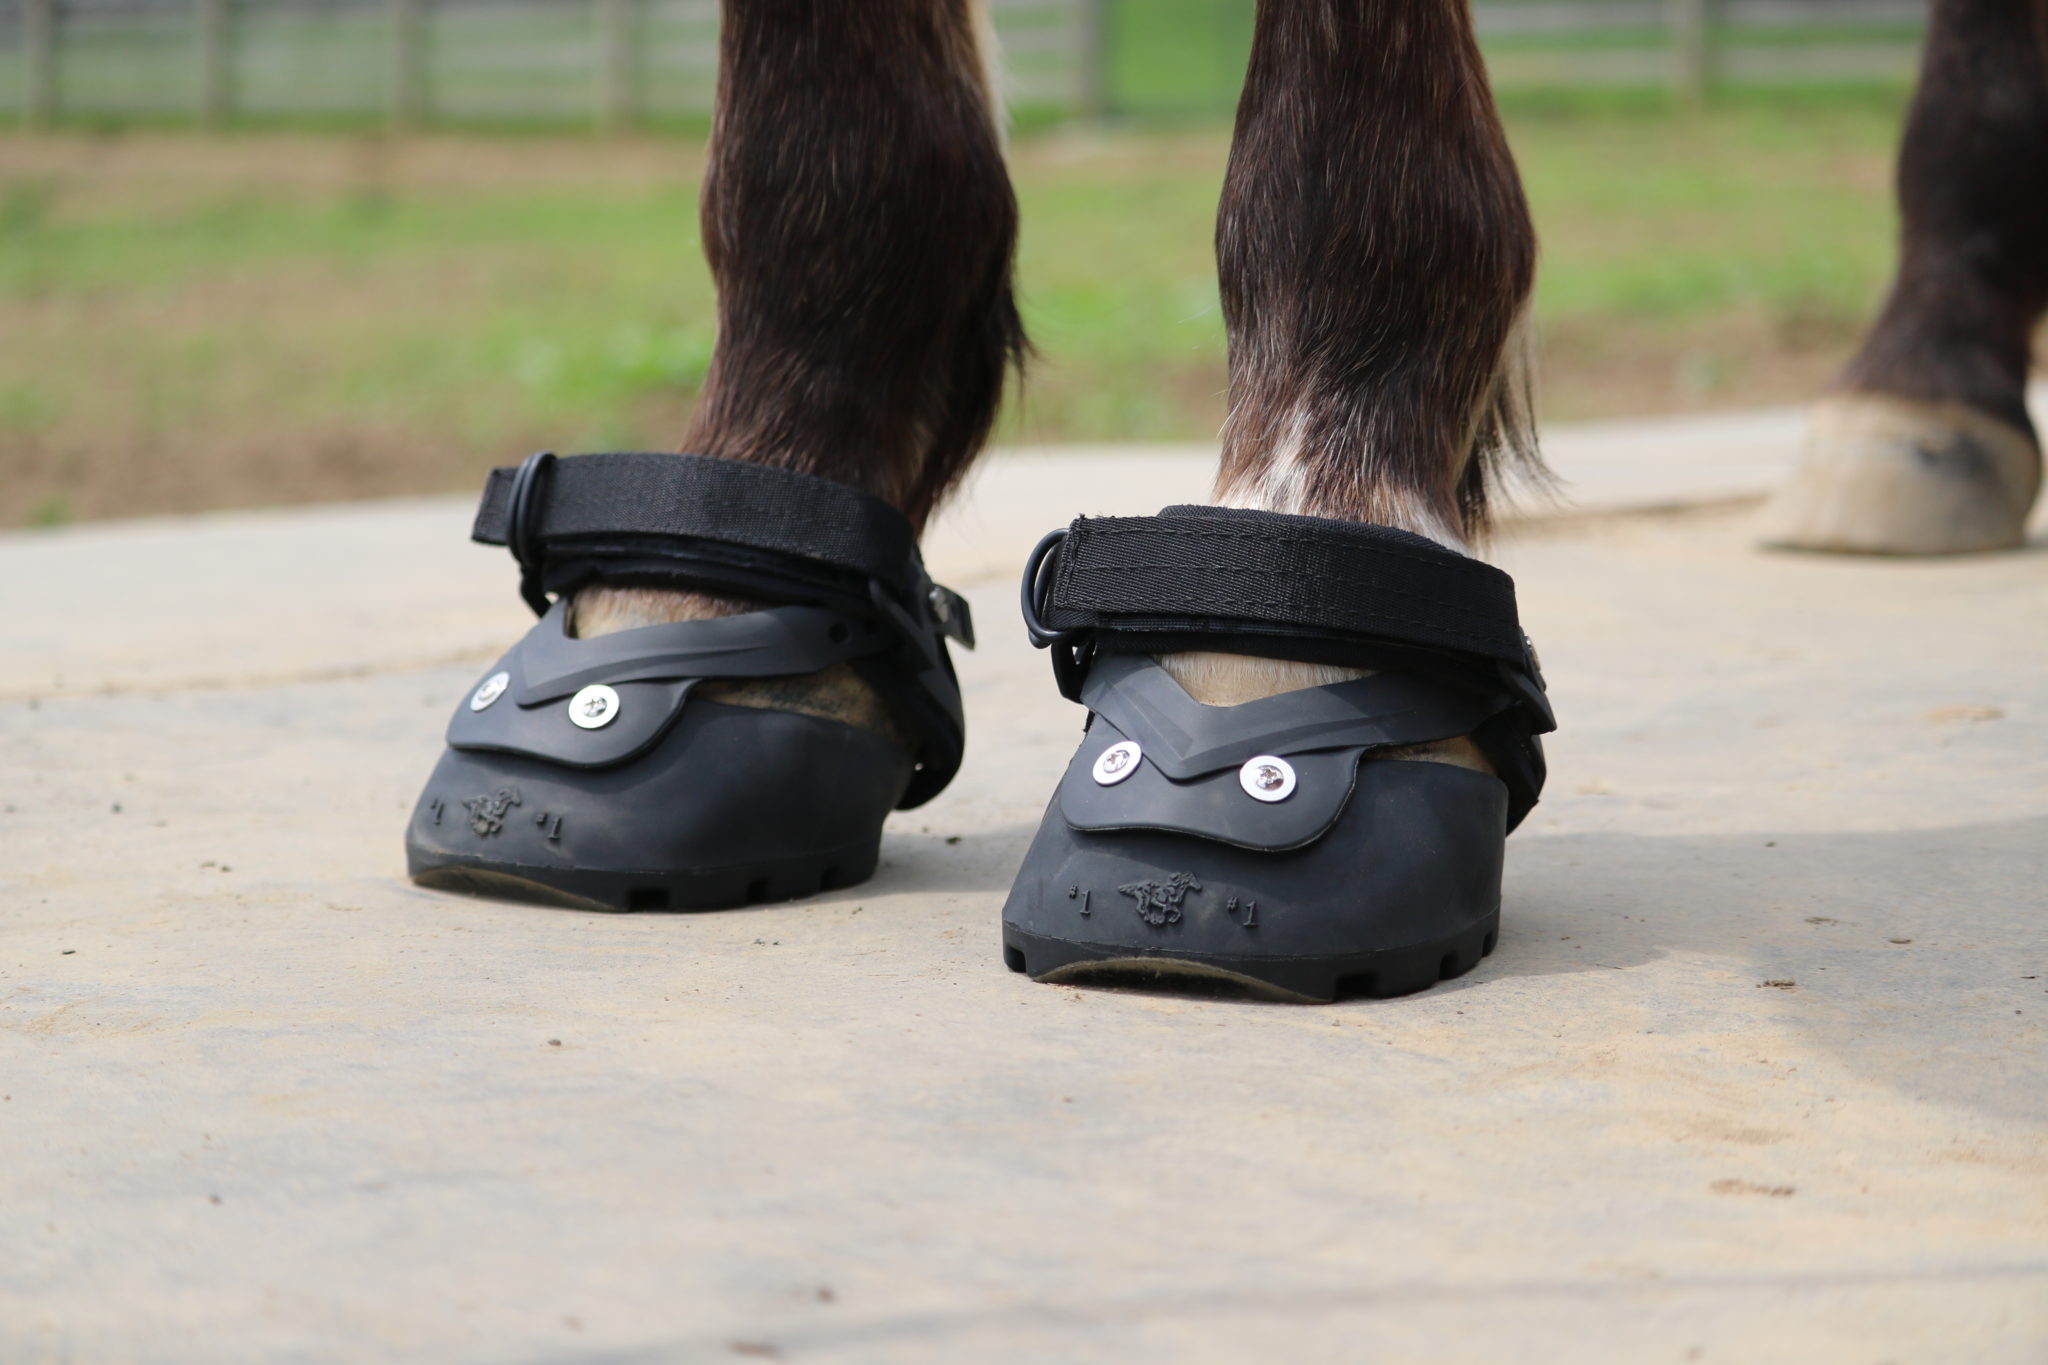 How to Apply the New Easyboot Glove 50 - EasyCare Hoof Boot News